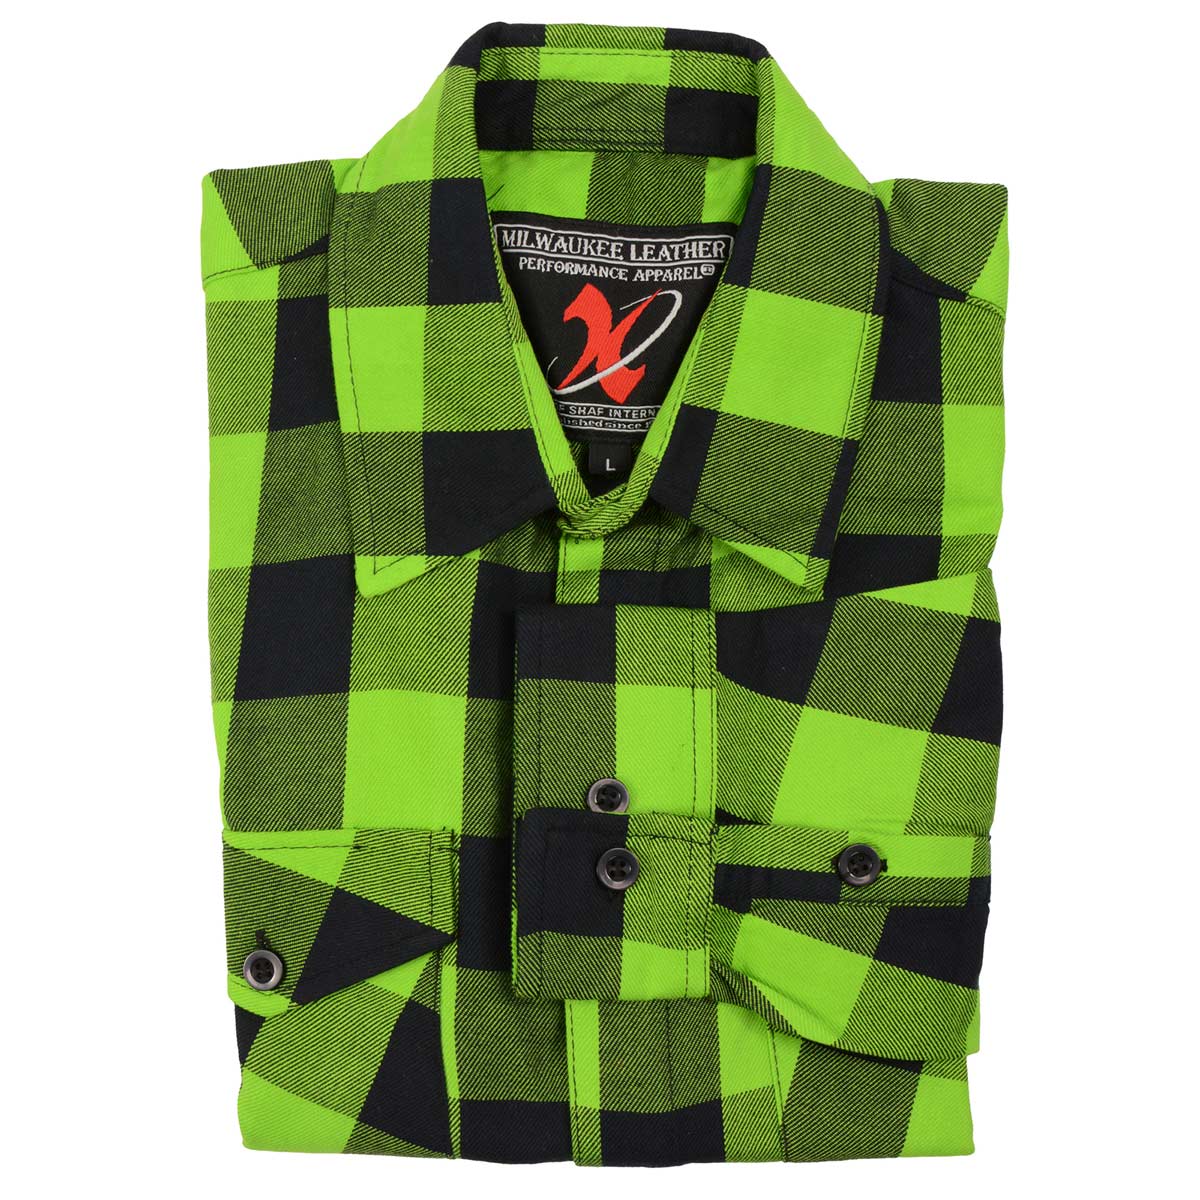 Milwaukee Leather Men's Flannel Plaid Shirt Black and Neon Green Long Sleeve Cotton Button Down Shirt MNG11632 Medium